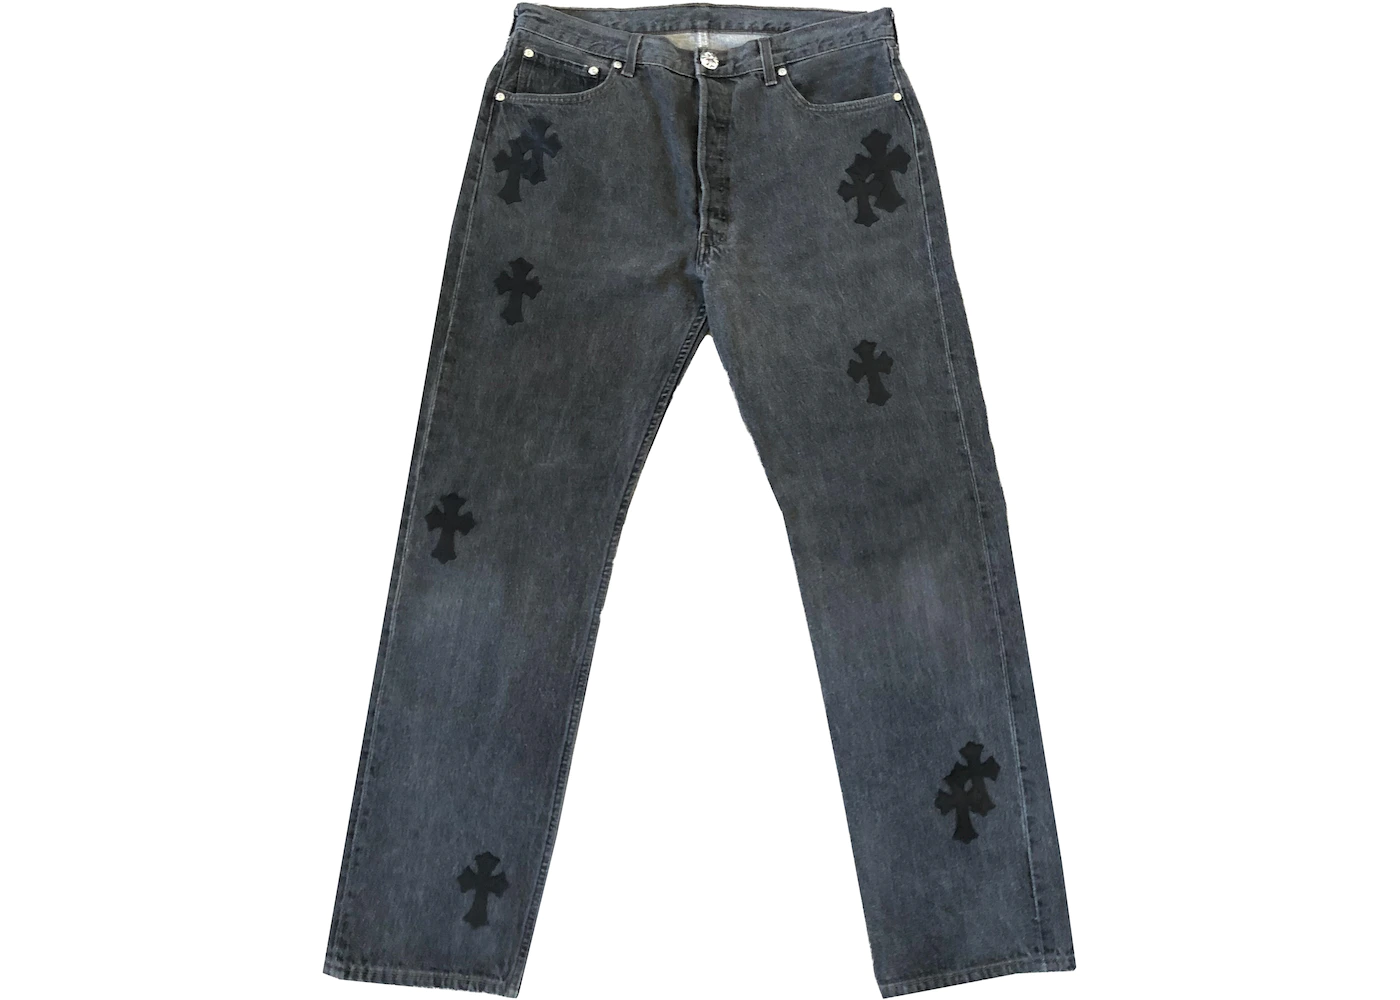 Discovering Chrome Hearts Jeans